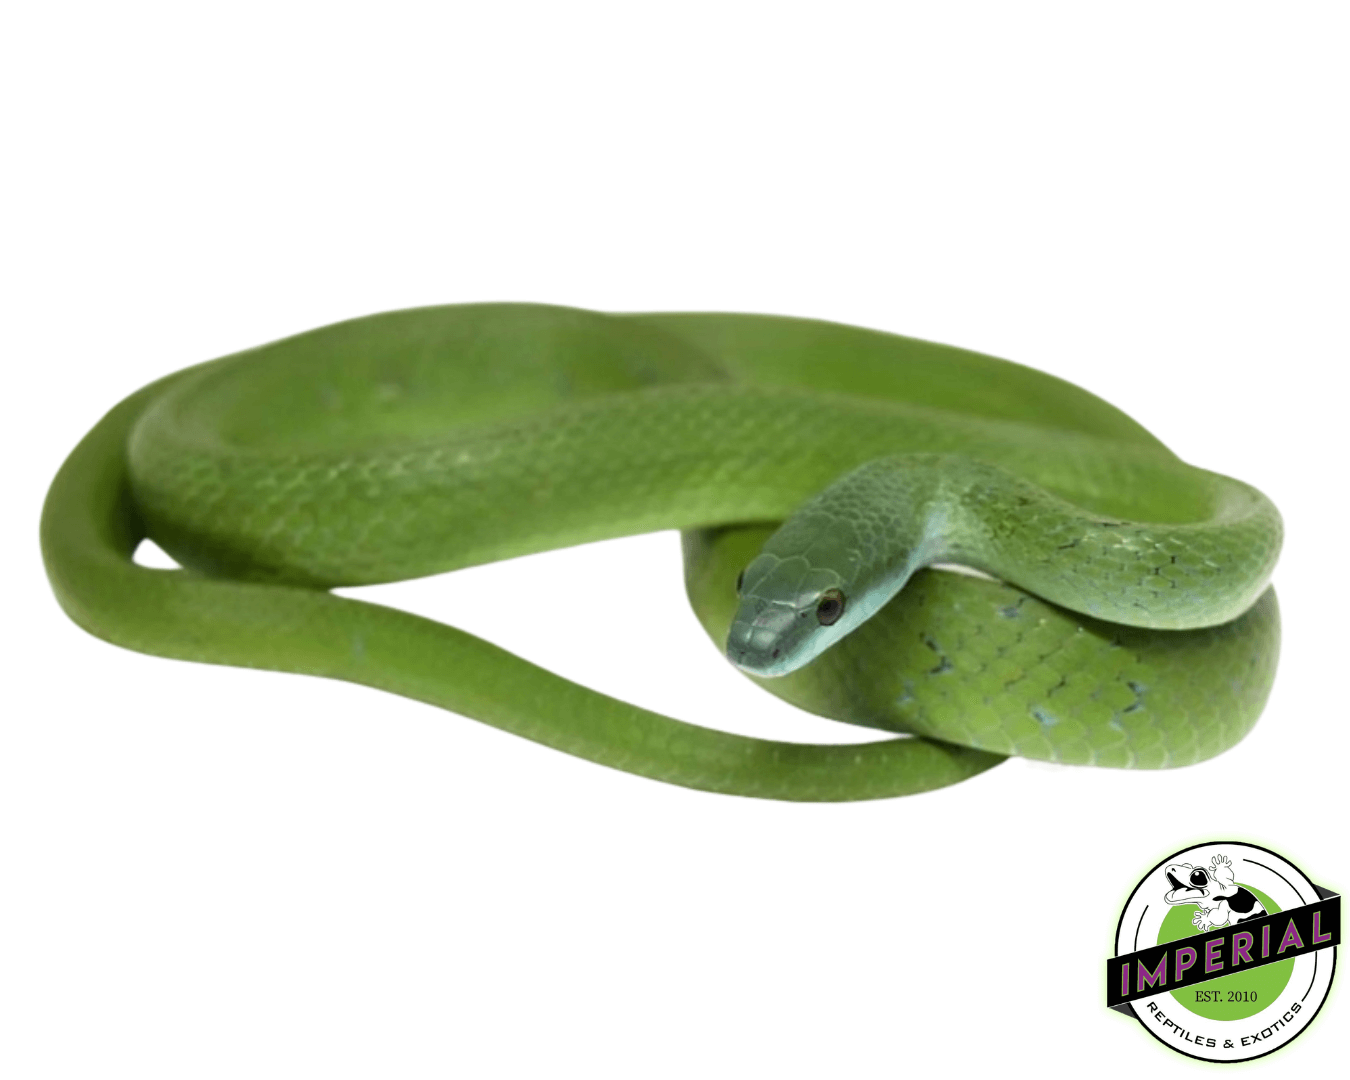 suriname green racer snake for sale, buy reptiles online at cheap prices